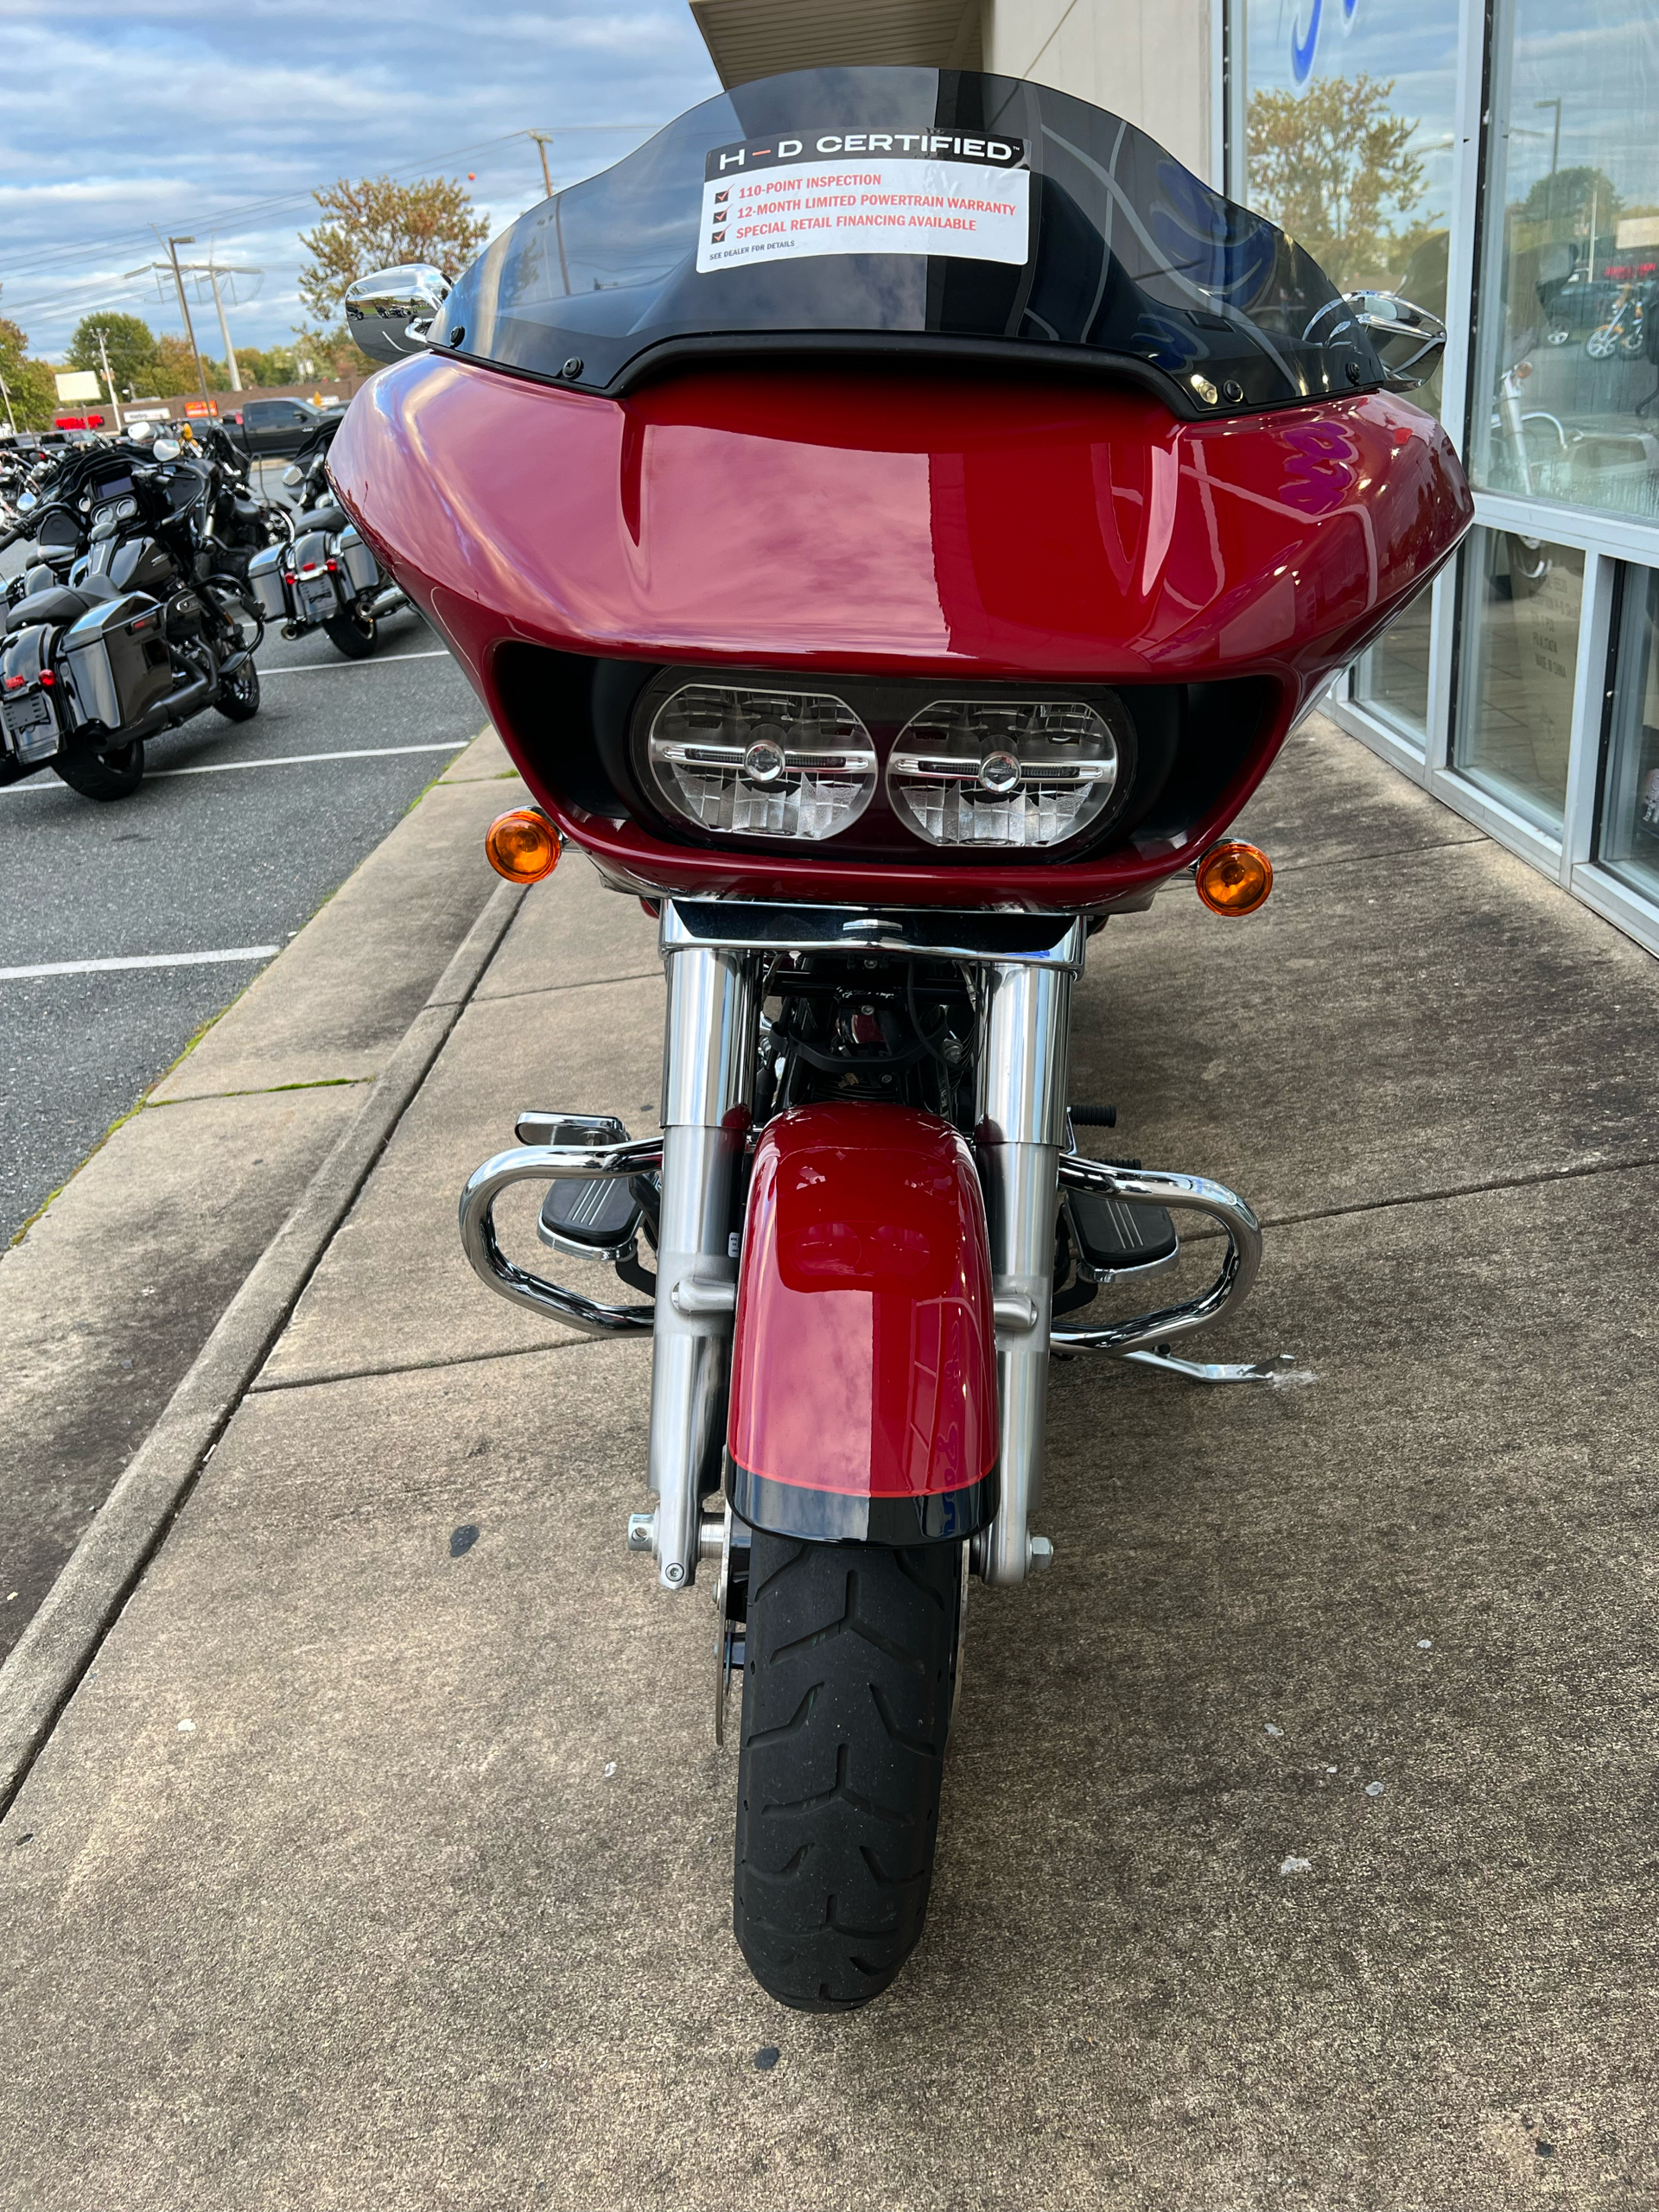 2021 Harley-Davidson Road Glide Special in Dumfries, Virginia - Photo 18